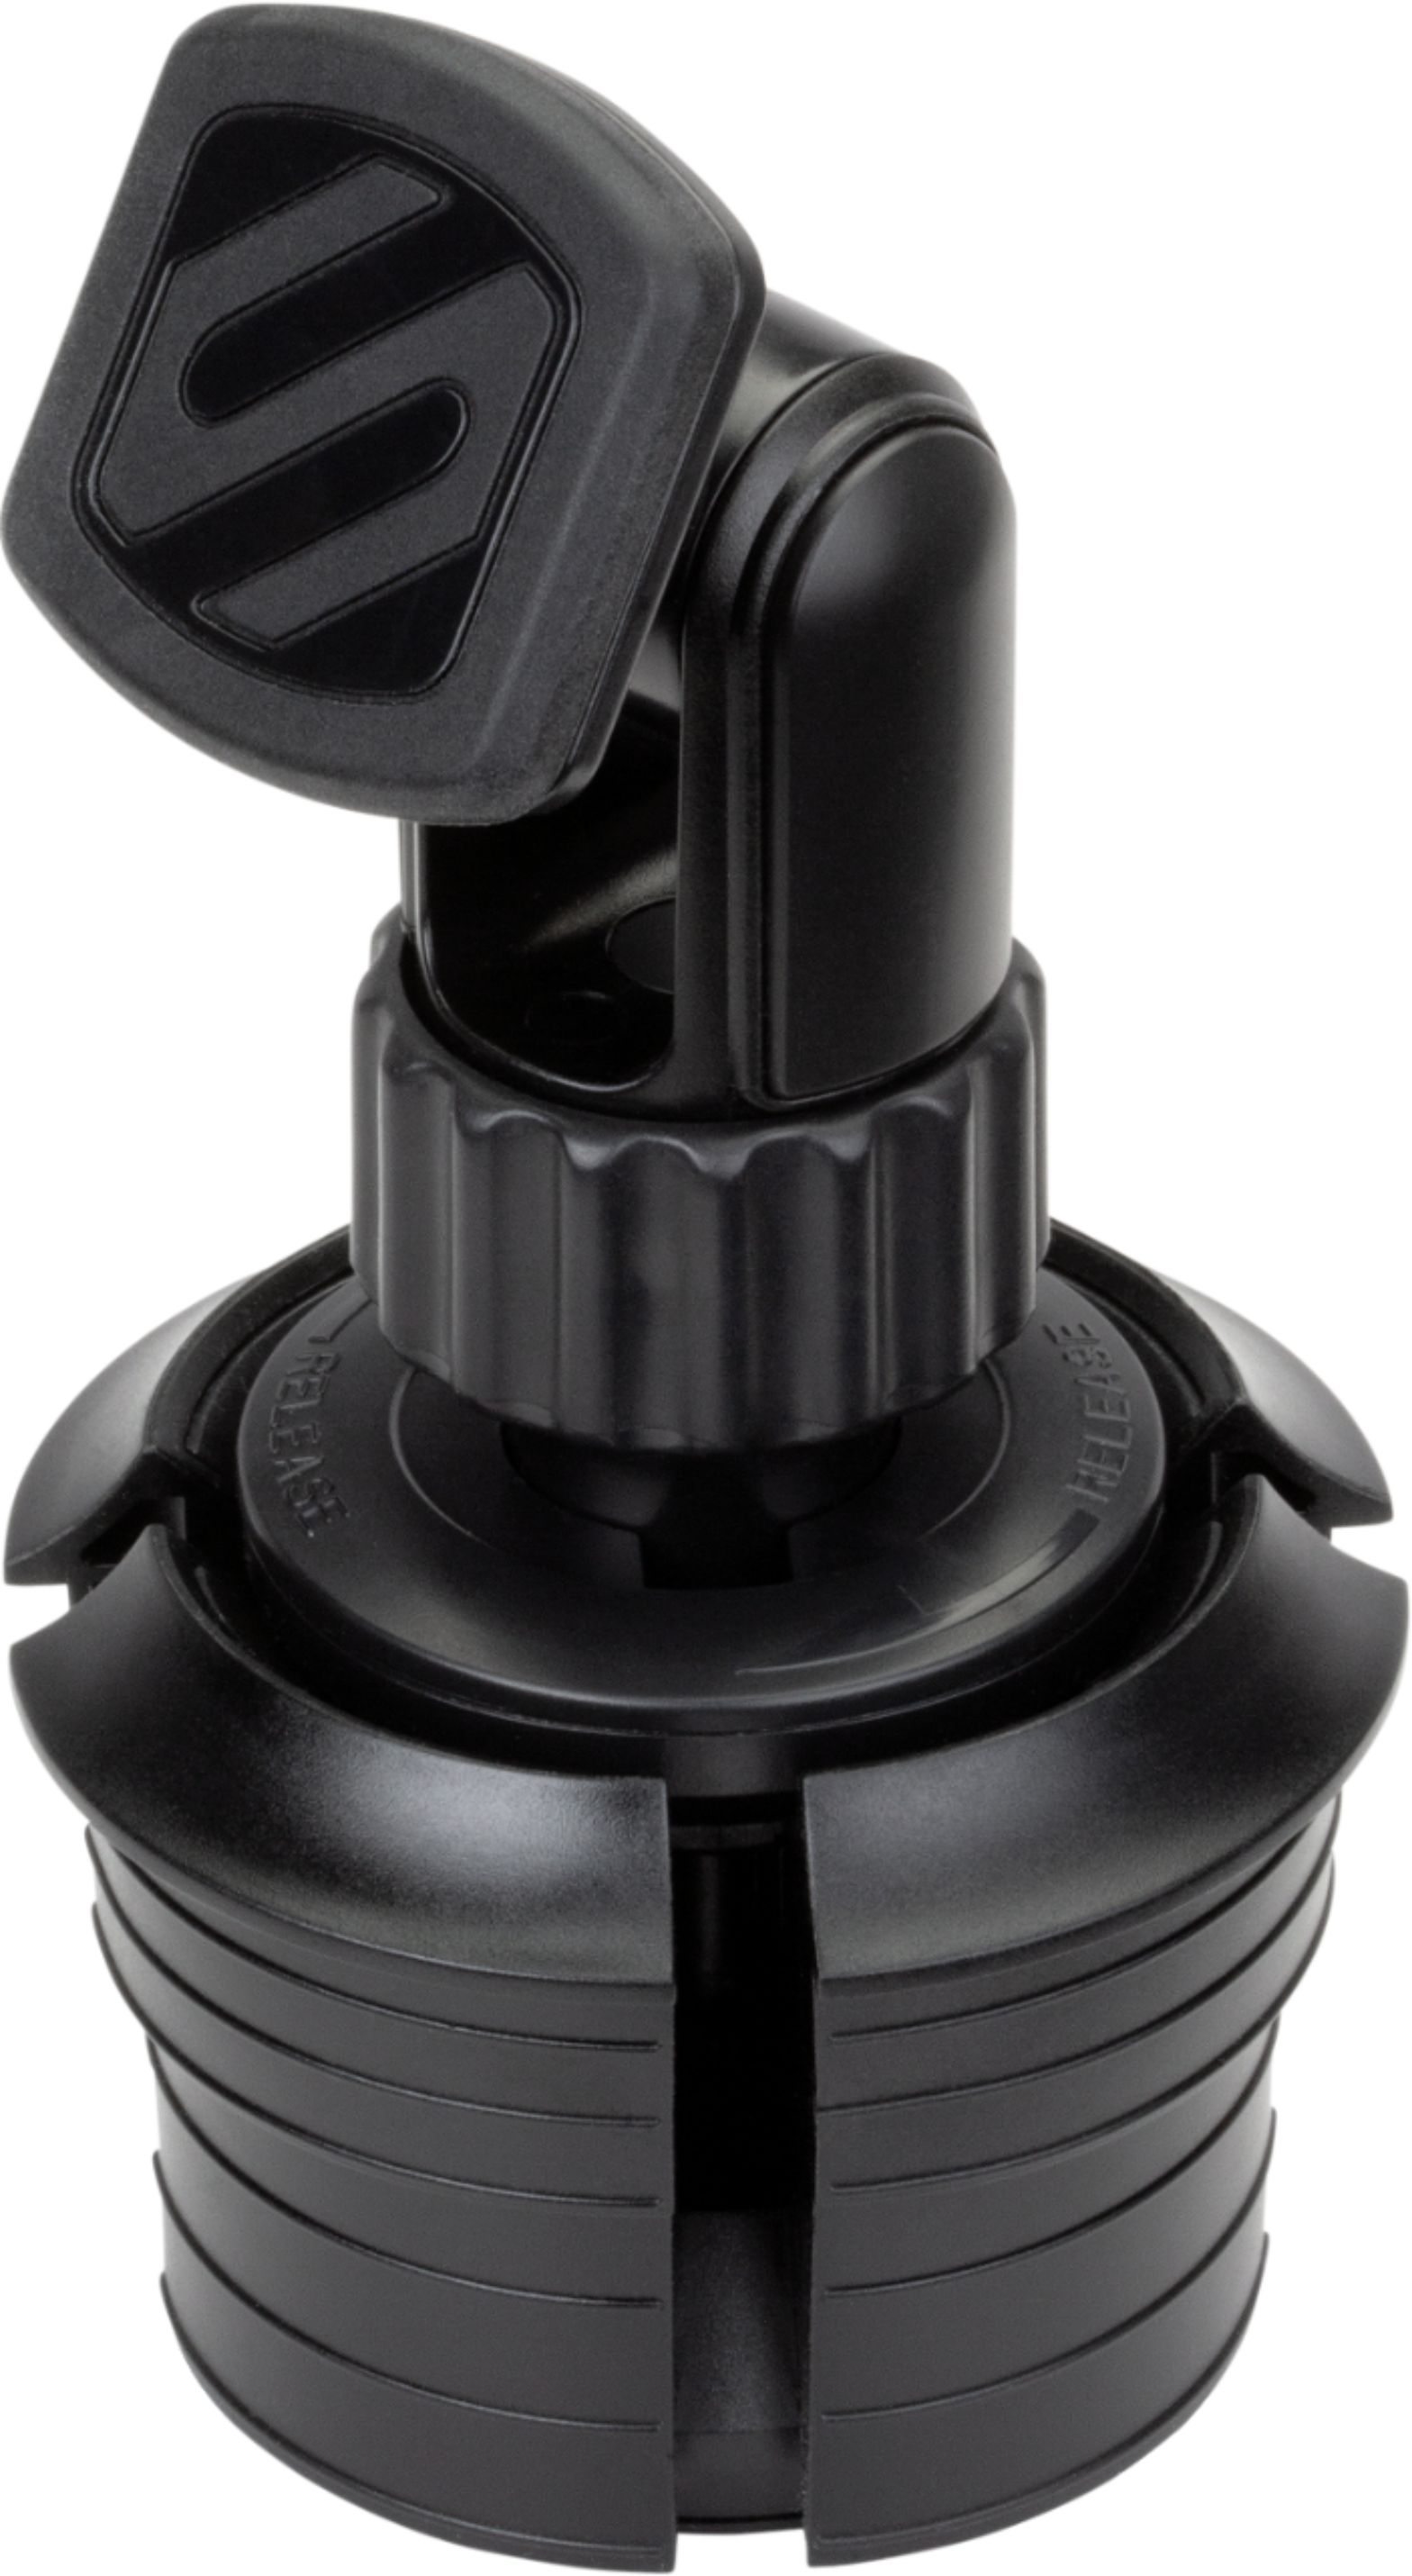 Scosche - MagicMount Cup Holder Mount for Most Cell Phones - Black